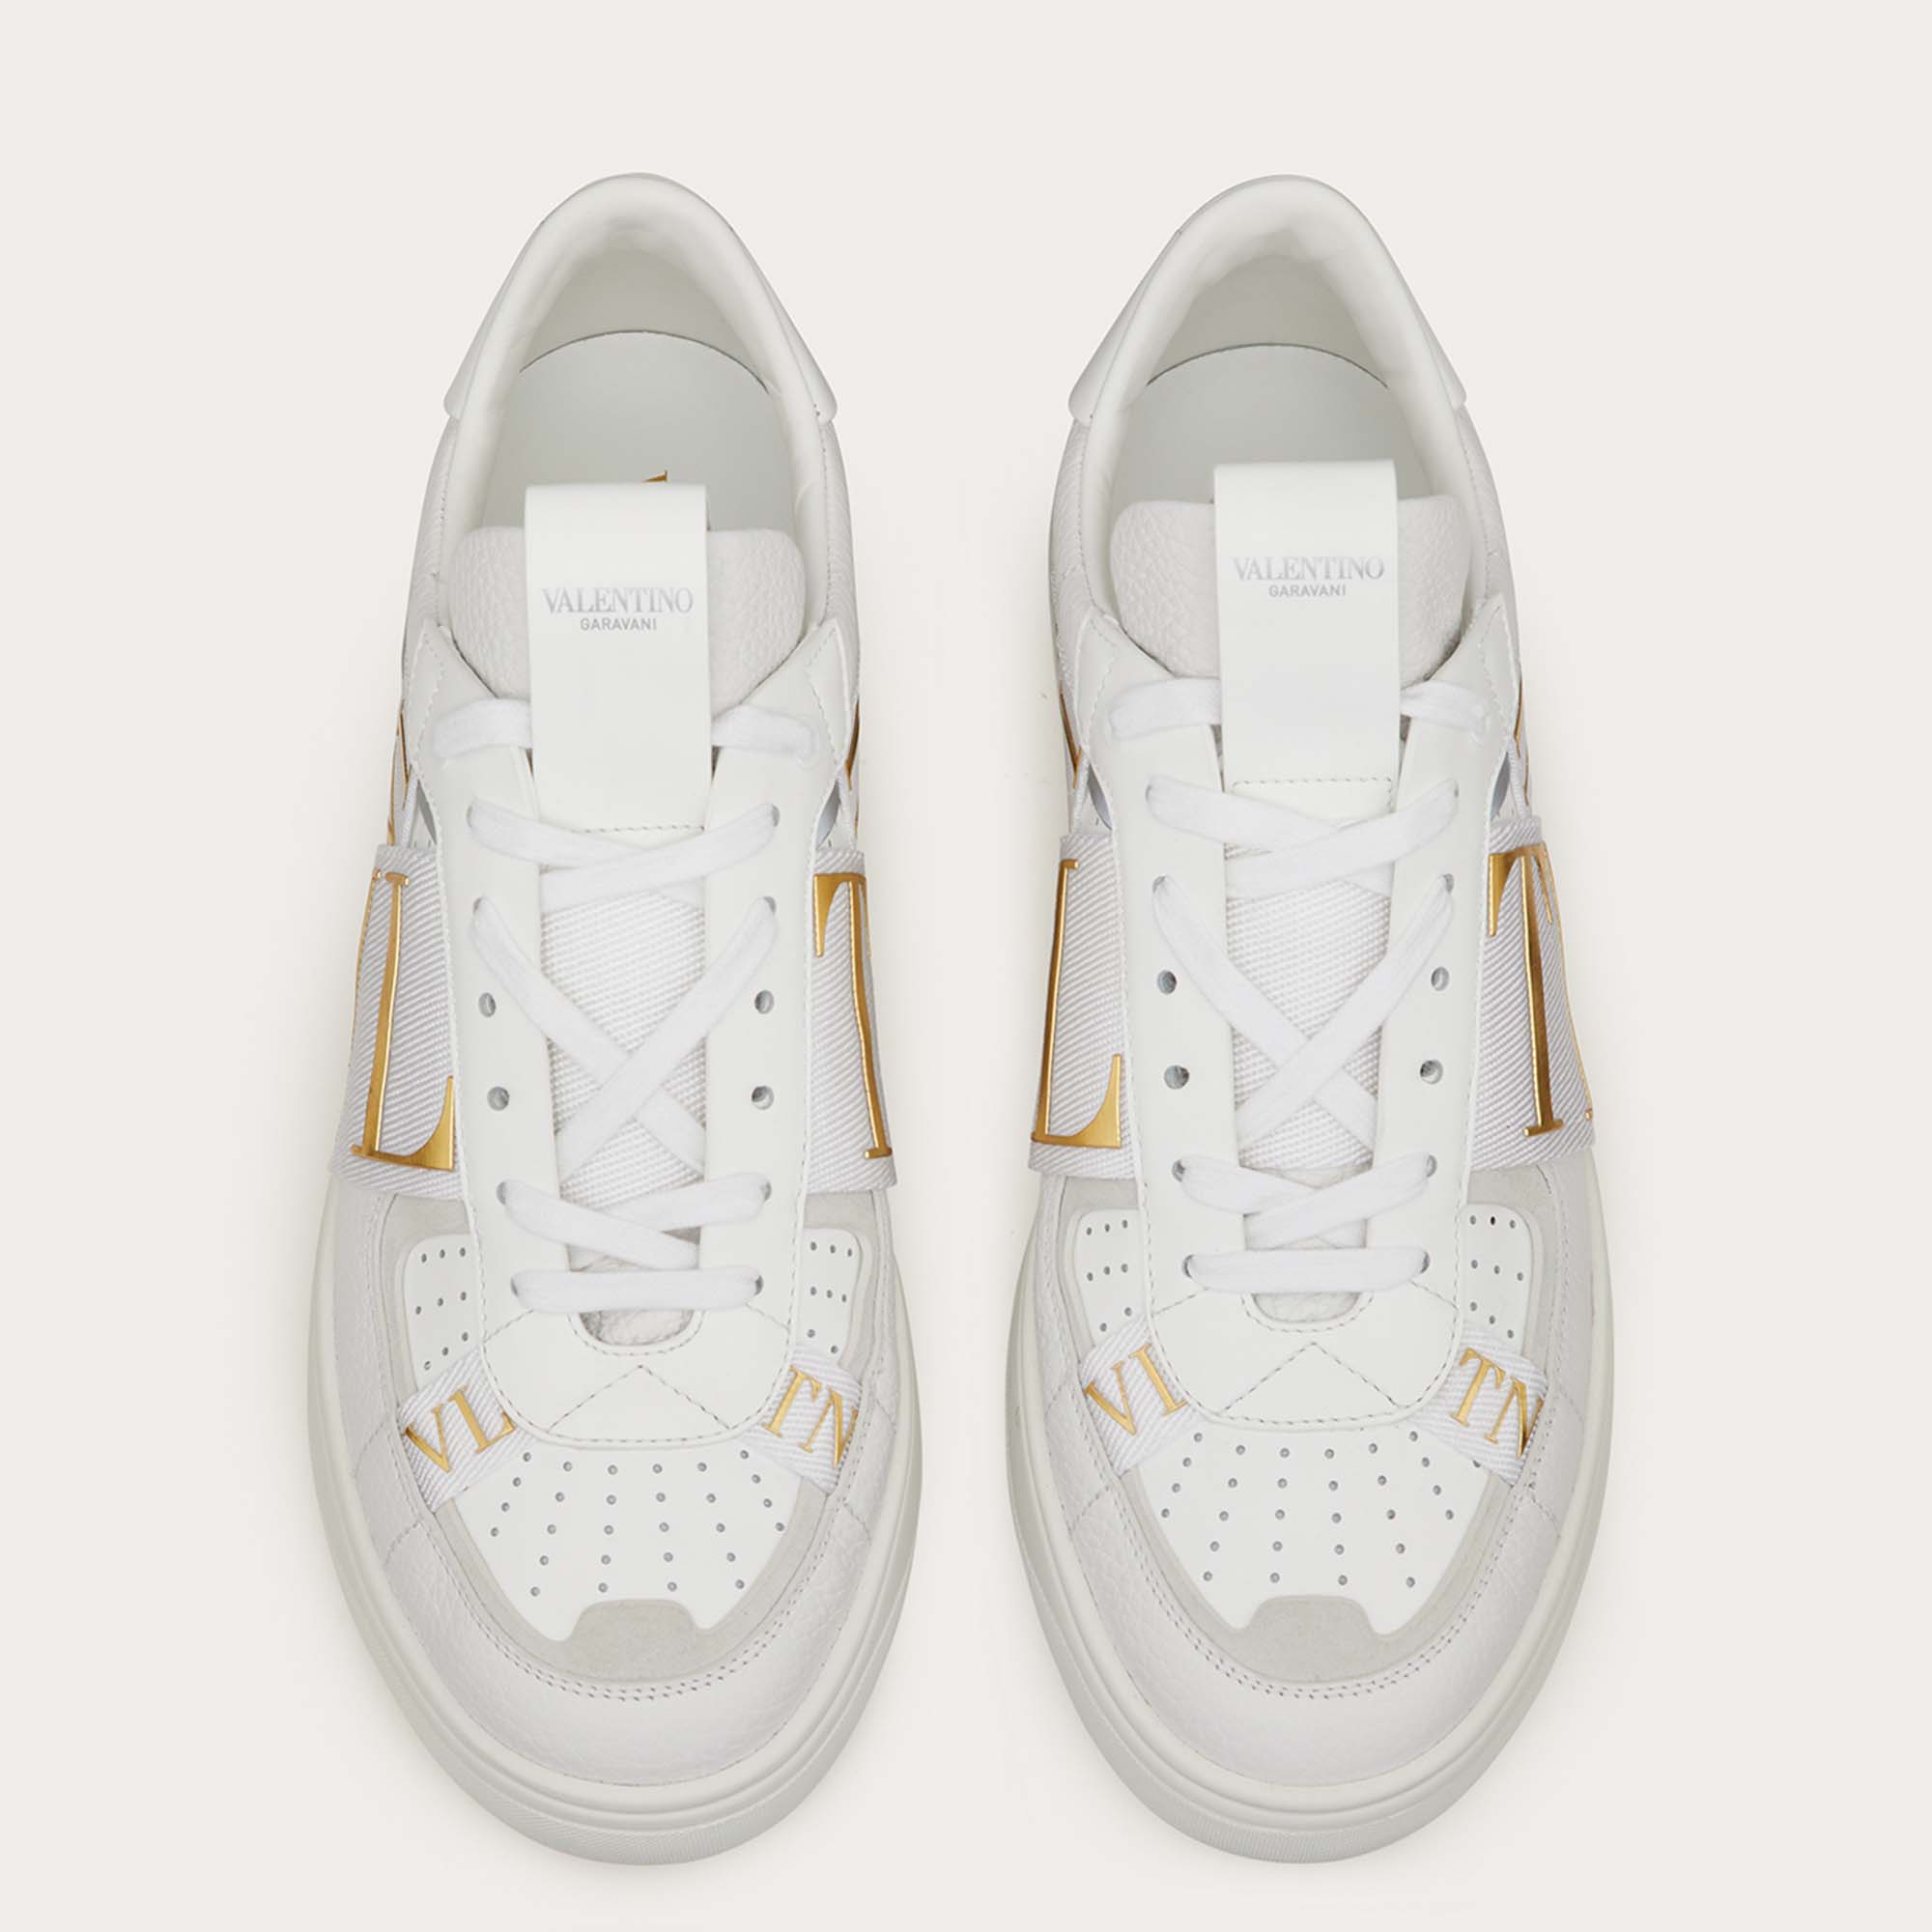 

Valentino White/Gold Leather VL7N Low Top Sneaker Size